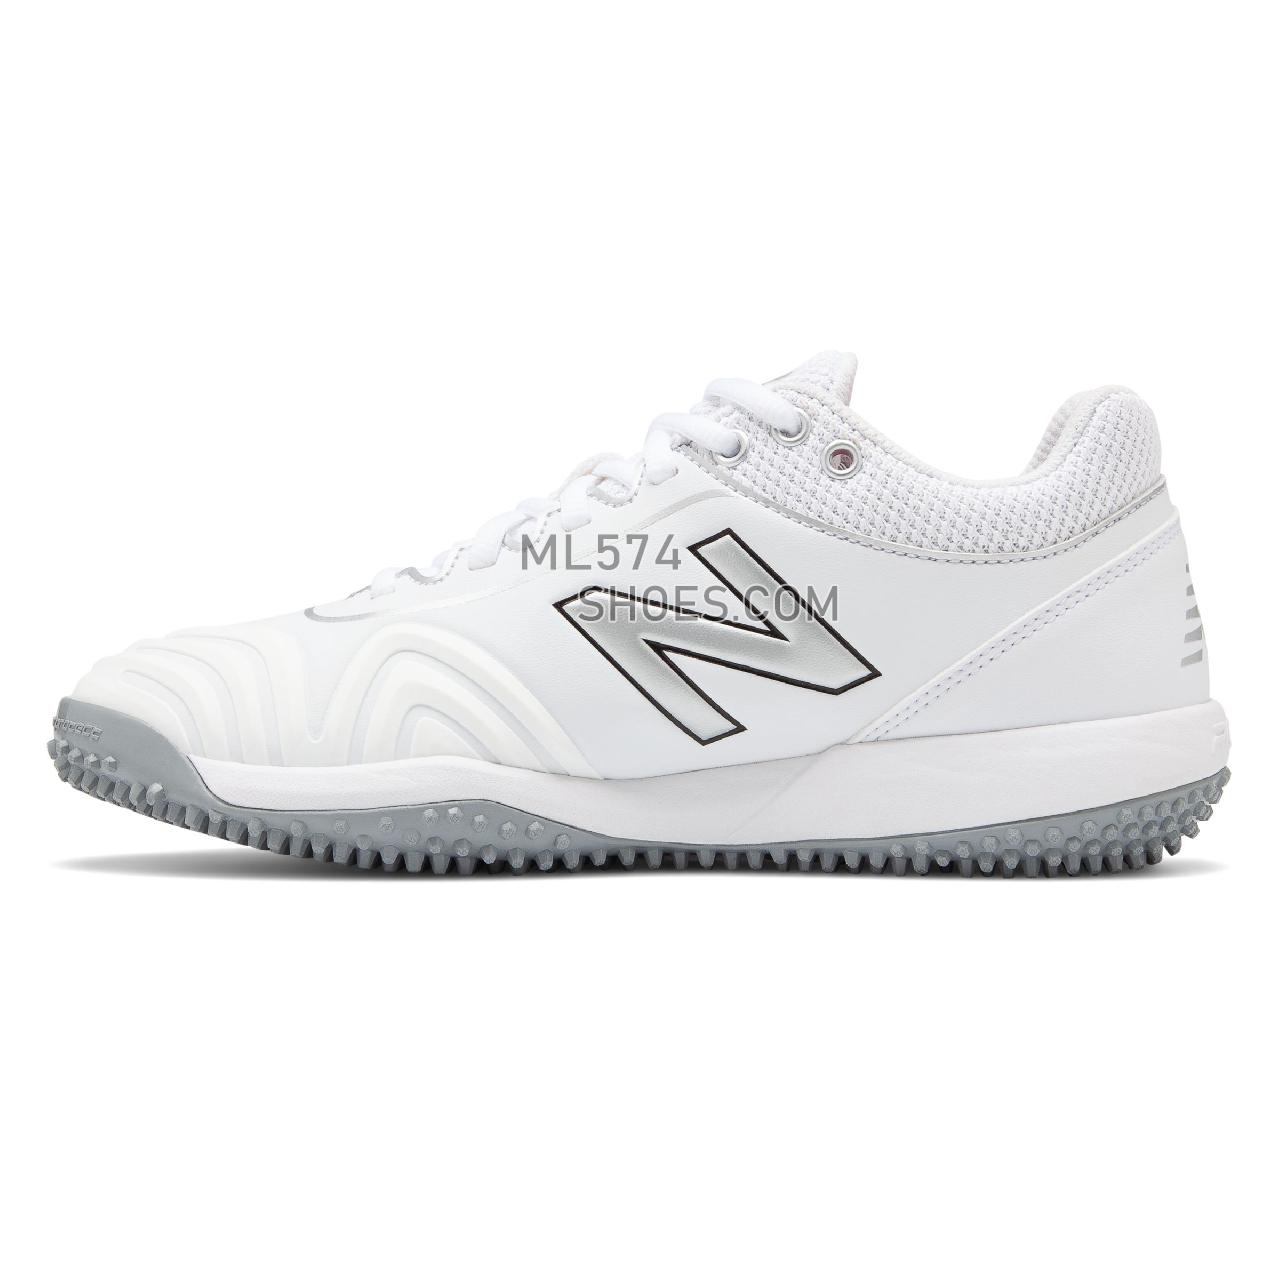 New Balance Fusev2 Turf - Women's Softball - White with Silver - STFUSEW2